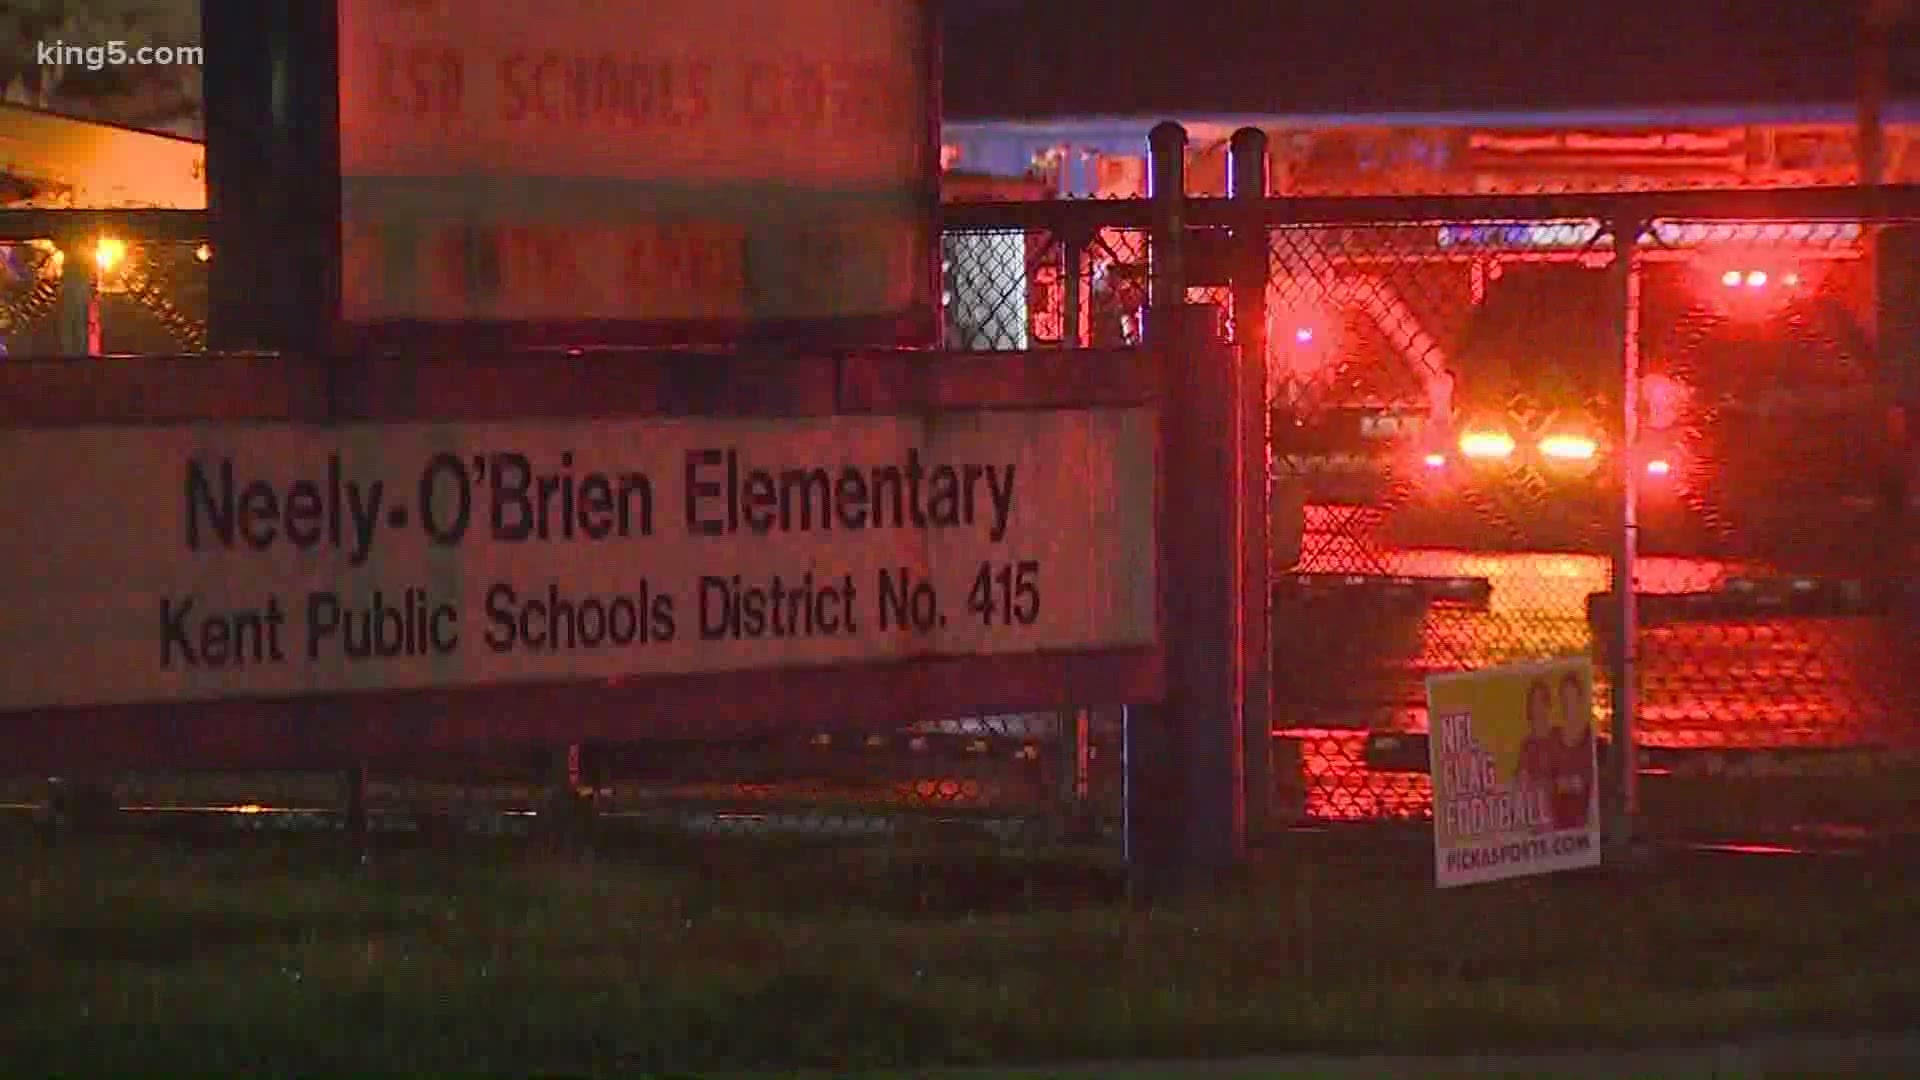 Firefighters with the Puget Sound Regional Fire Authority made quick work of a roof fire at a Kent elementary school Wednesday morning.